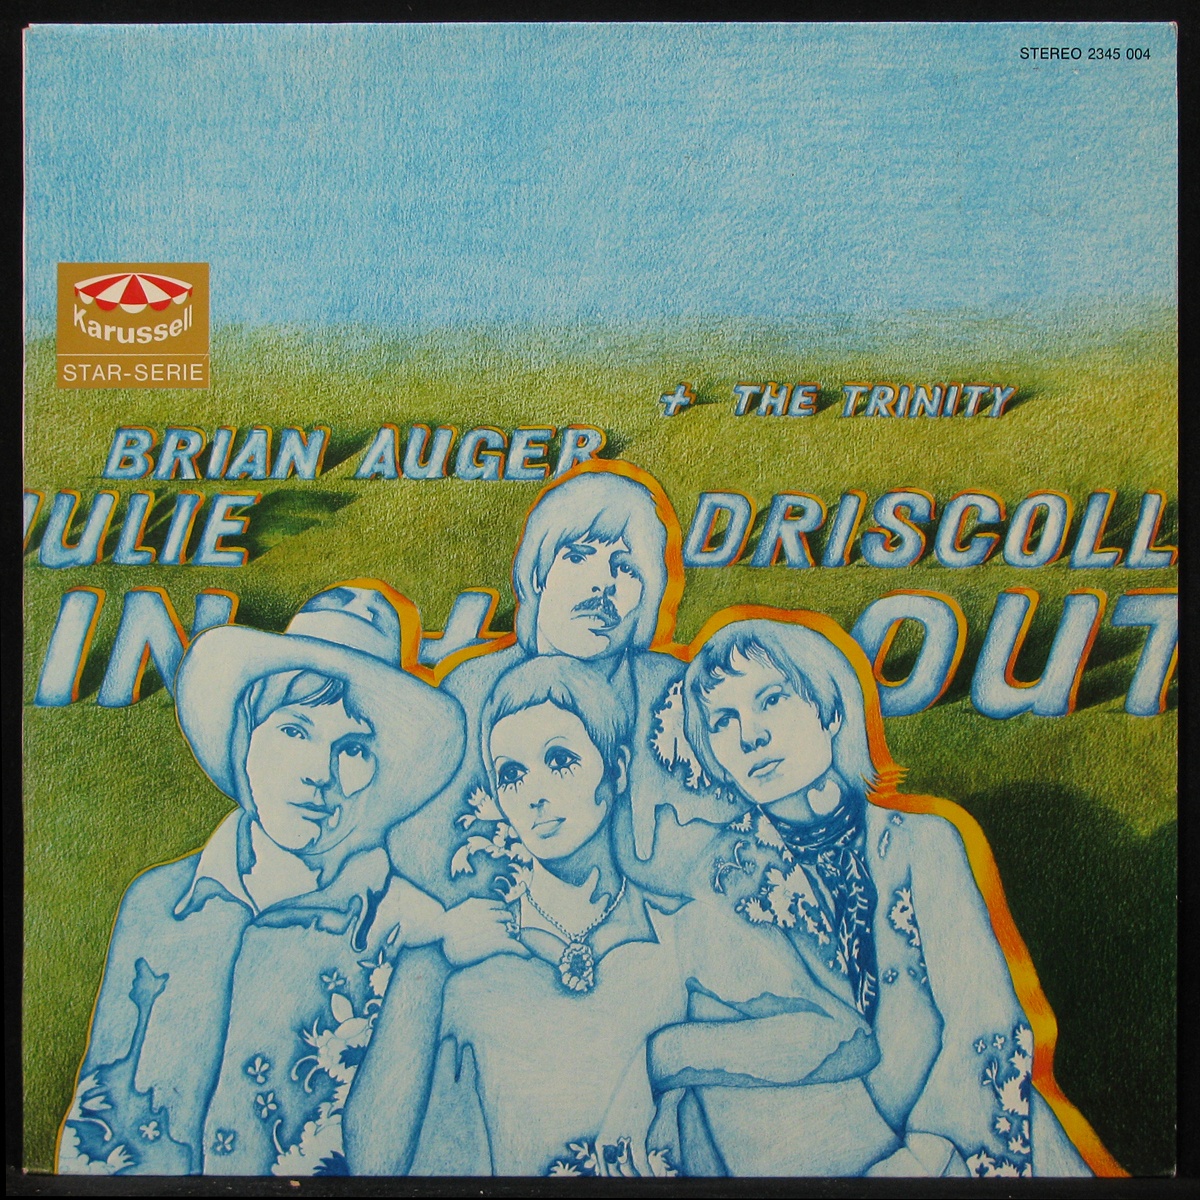 LP Julie Driscoll, Brian Auger & The Trinity — In And Out фото